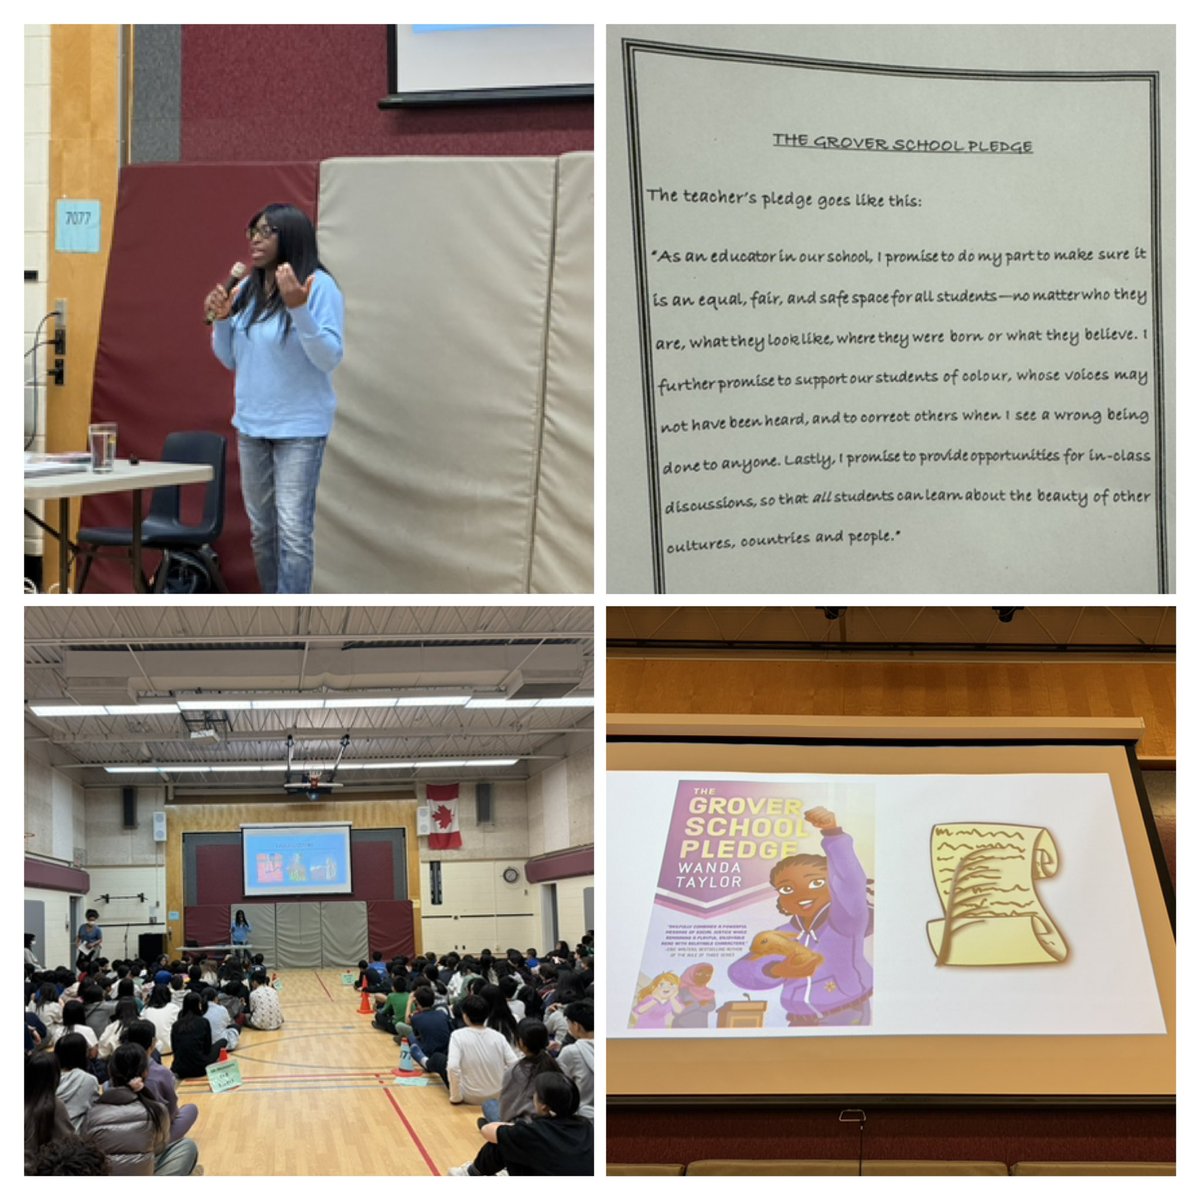 JRPS welcomed Wanda Taylor award winning author, film maker, and professor as part of Canadian Children's Book Week.  The presentation ended with The Grover School Pledge. #canadianchildrensbookweek #yrdsb